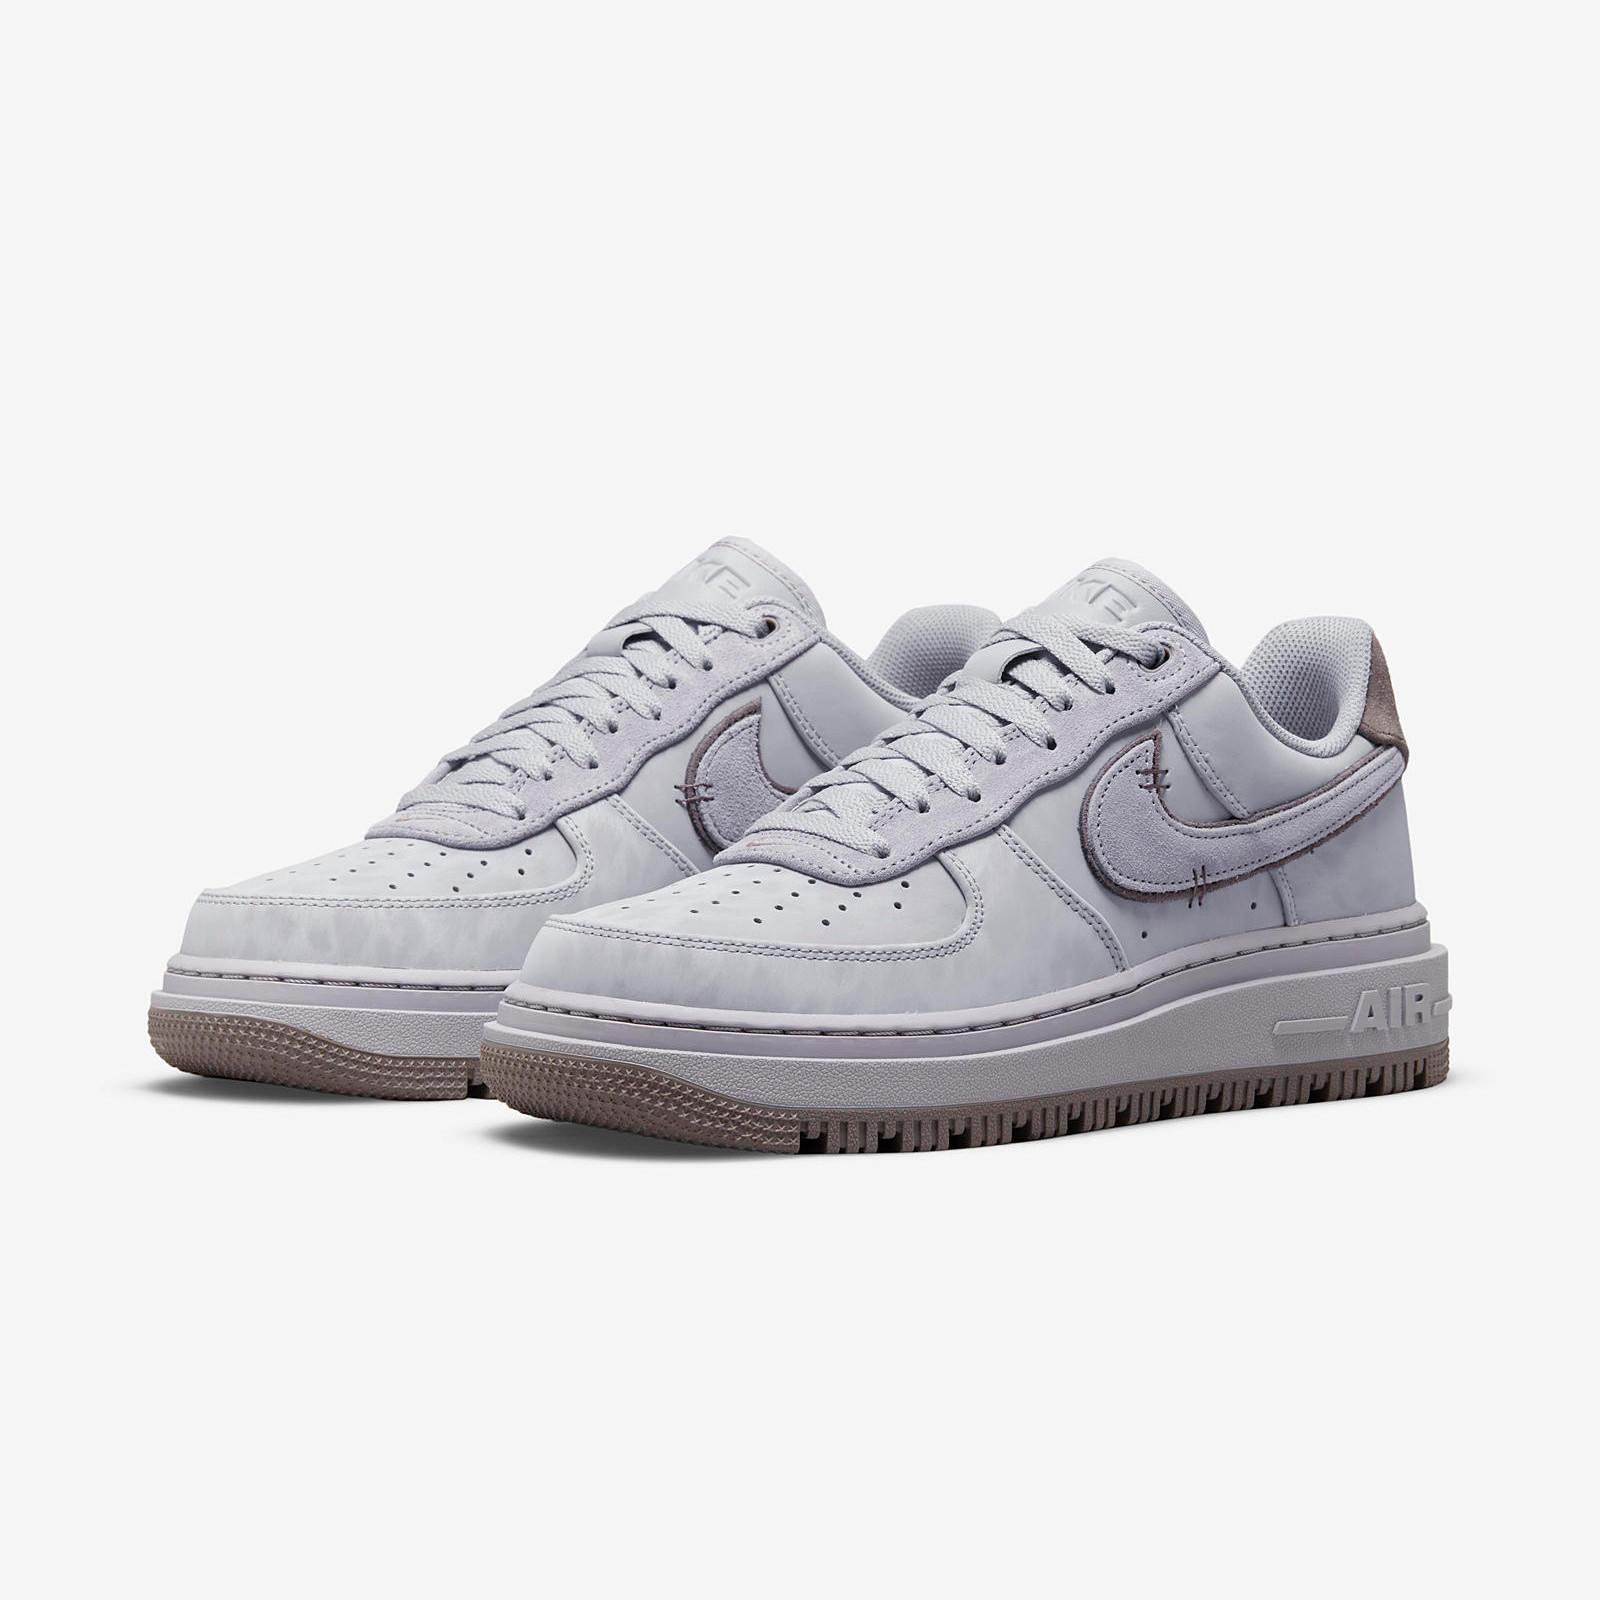 Nike Air Force 1 Luxe
« Providence Purple »